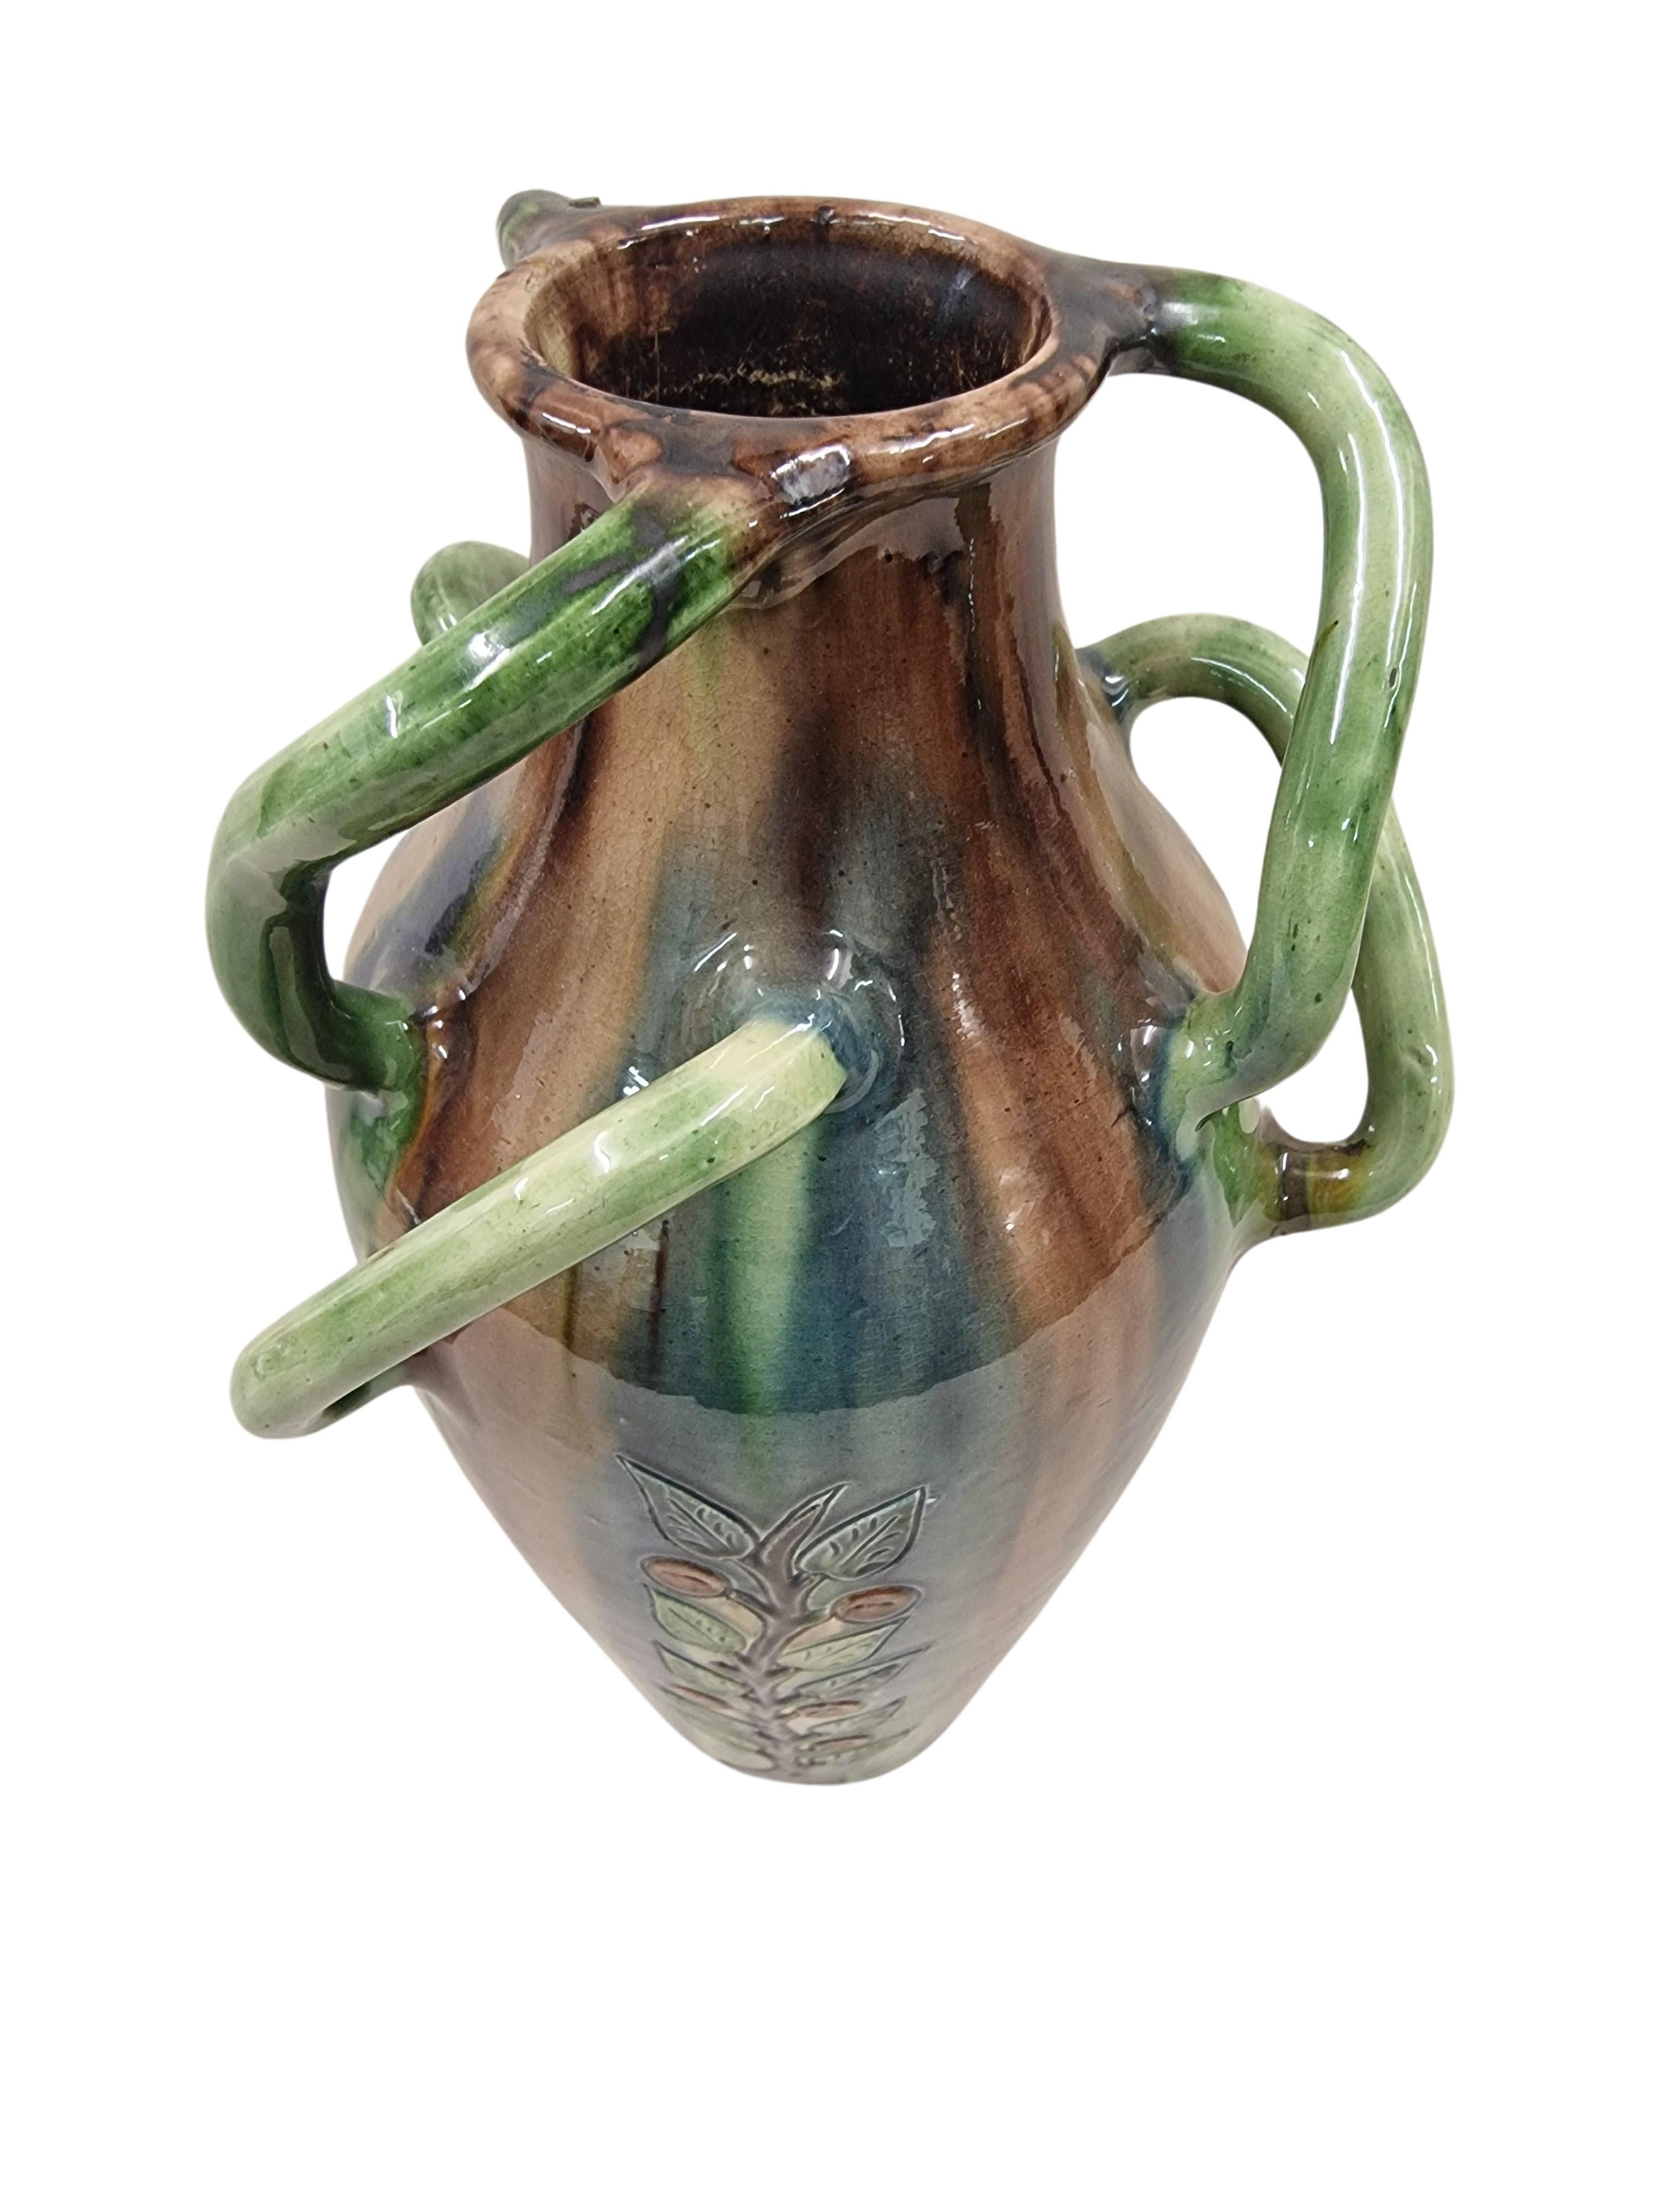 Stunning flower vase, ceramic, made in the Art Nouveau period around 1910 in Belgium. 

This beautiful unusual vase is designed with an exquisite running glaze, and three vertical stylized flower tendrils are cut around the vase.
What is